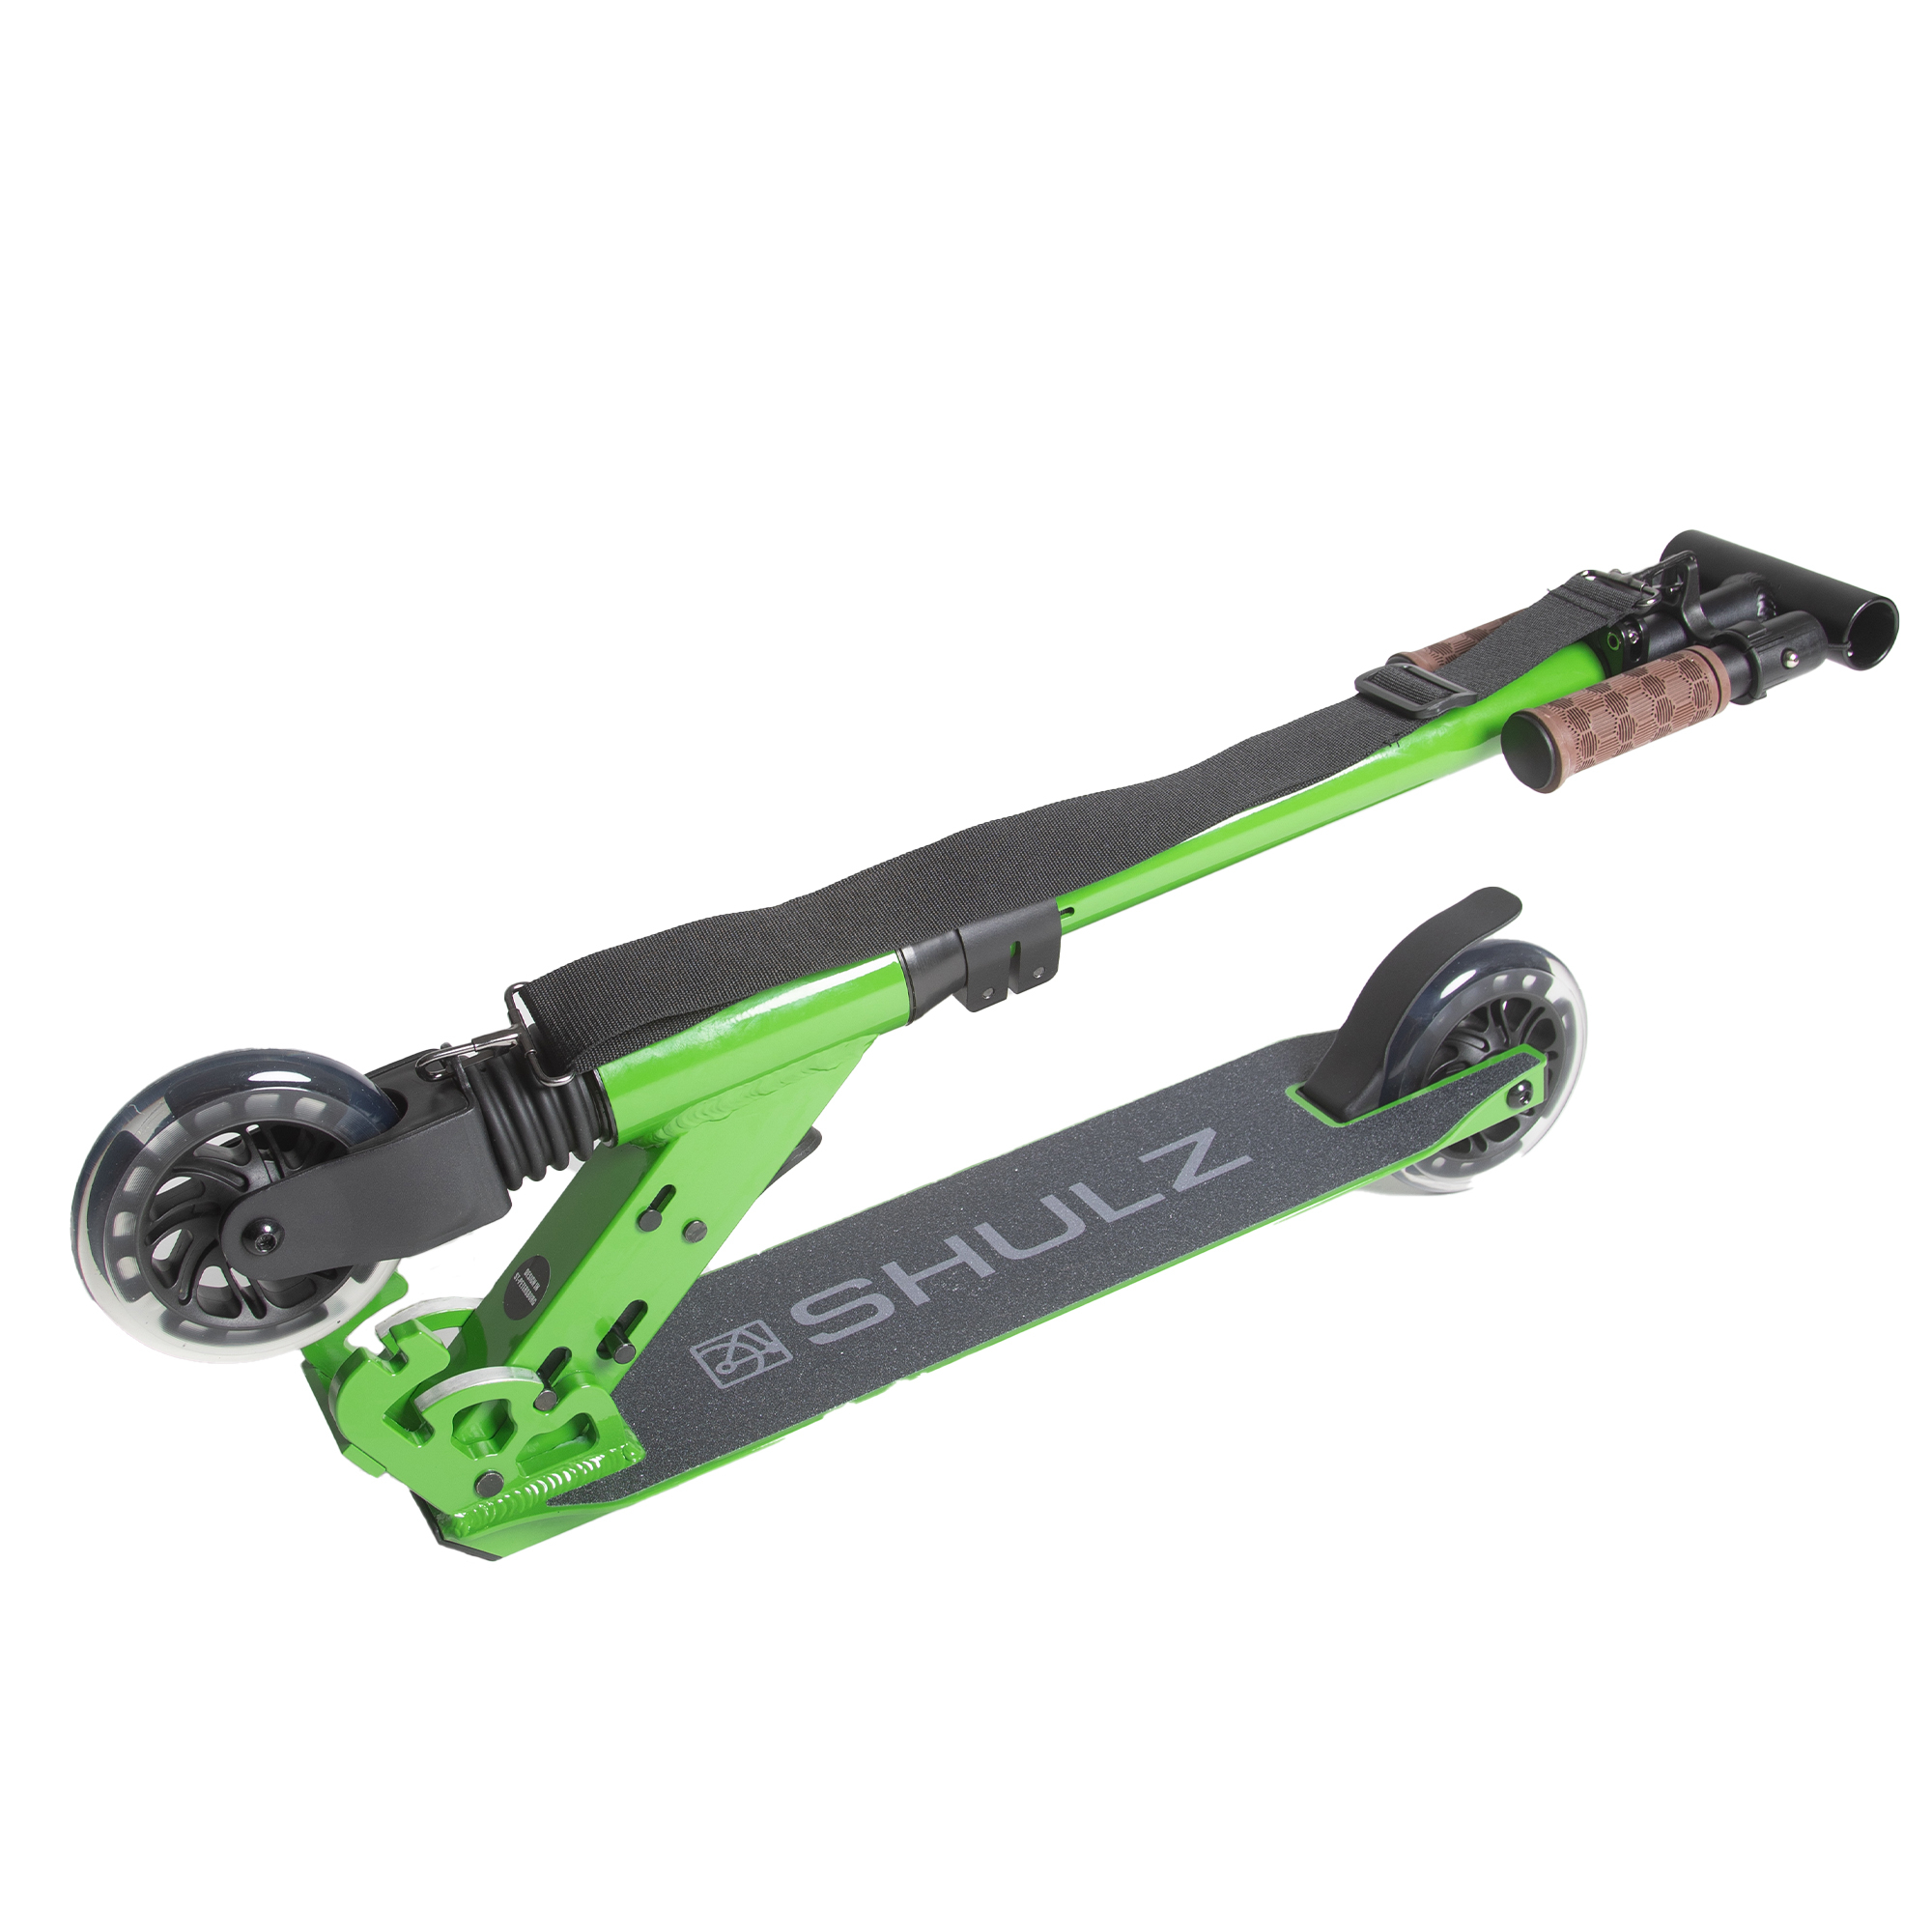 Shulz 120 LED scooter